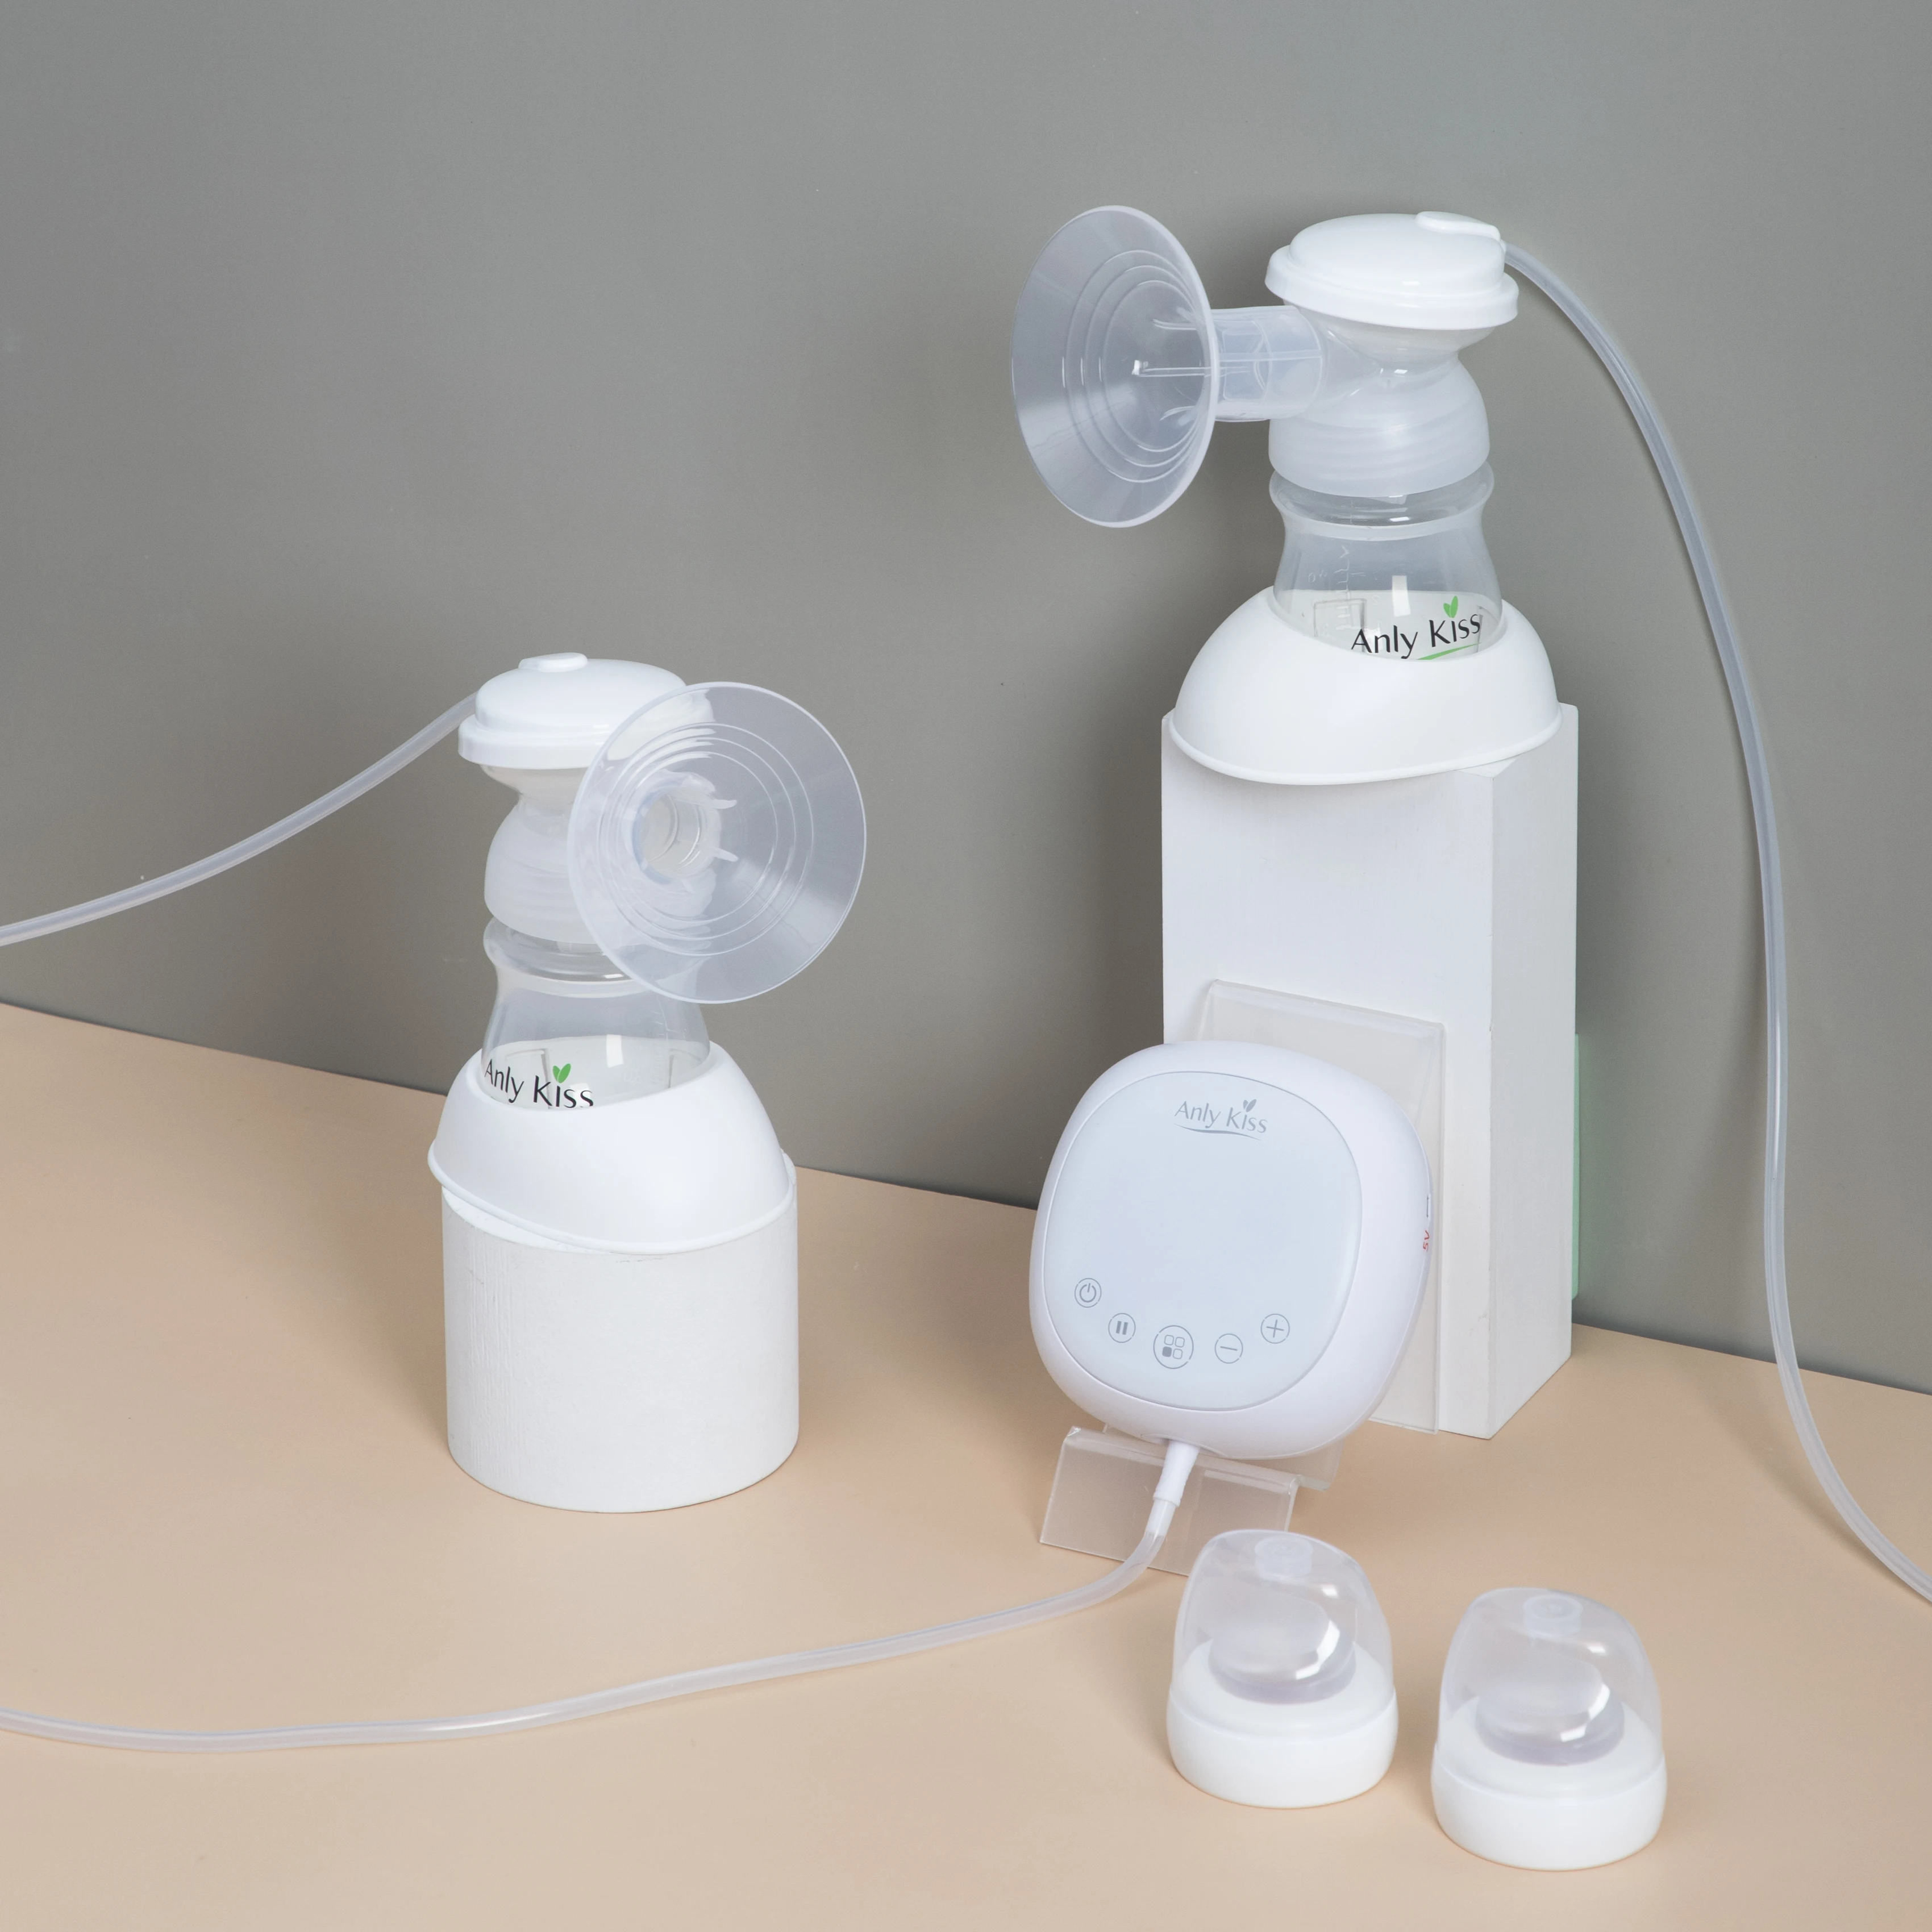 Anly Kiss Large Suction Bilateral Breast Pump Portable Adjustable Painless Electric Smart Breastpump For Breastfeeding Mom elvie single electric breast pump Electric breast pumps